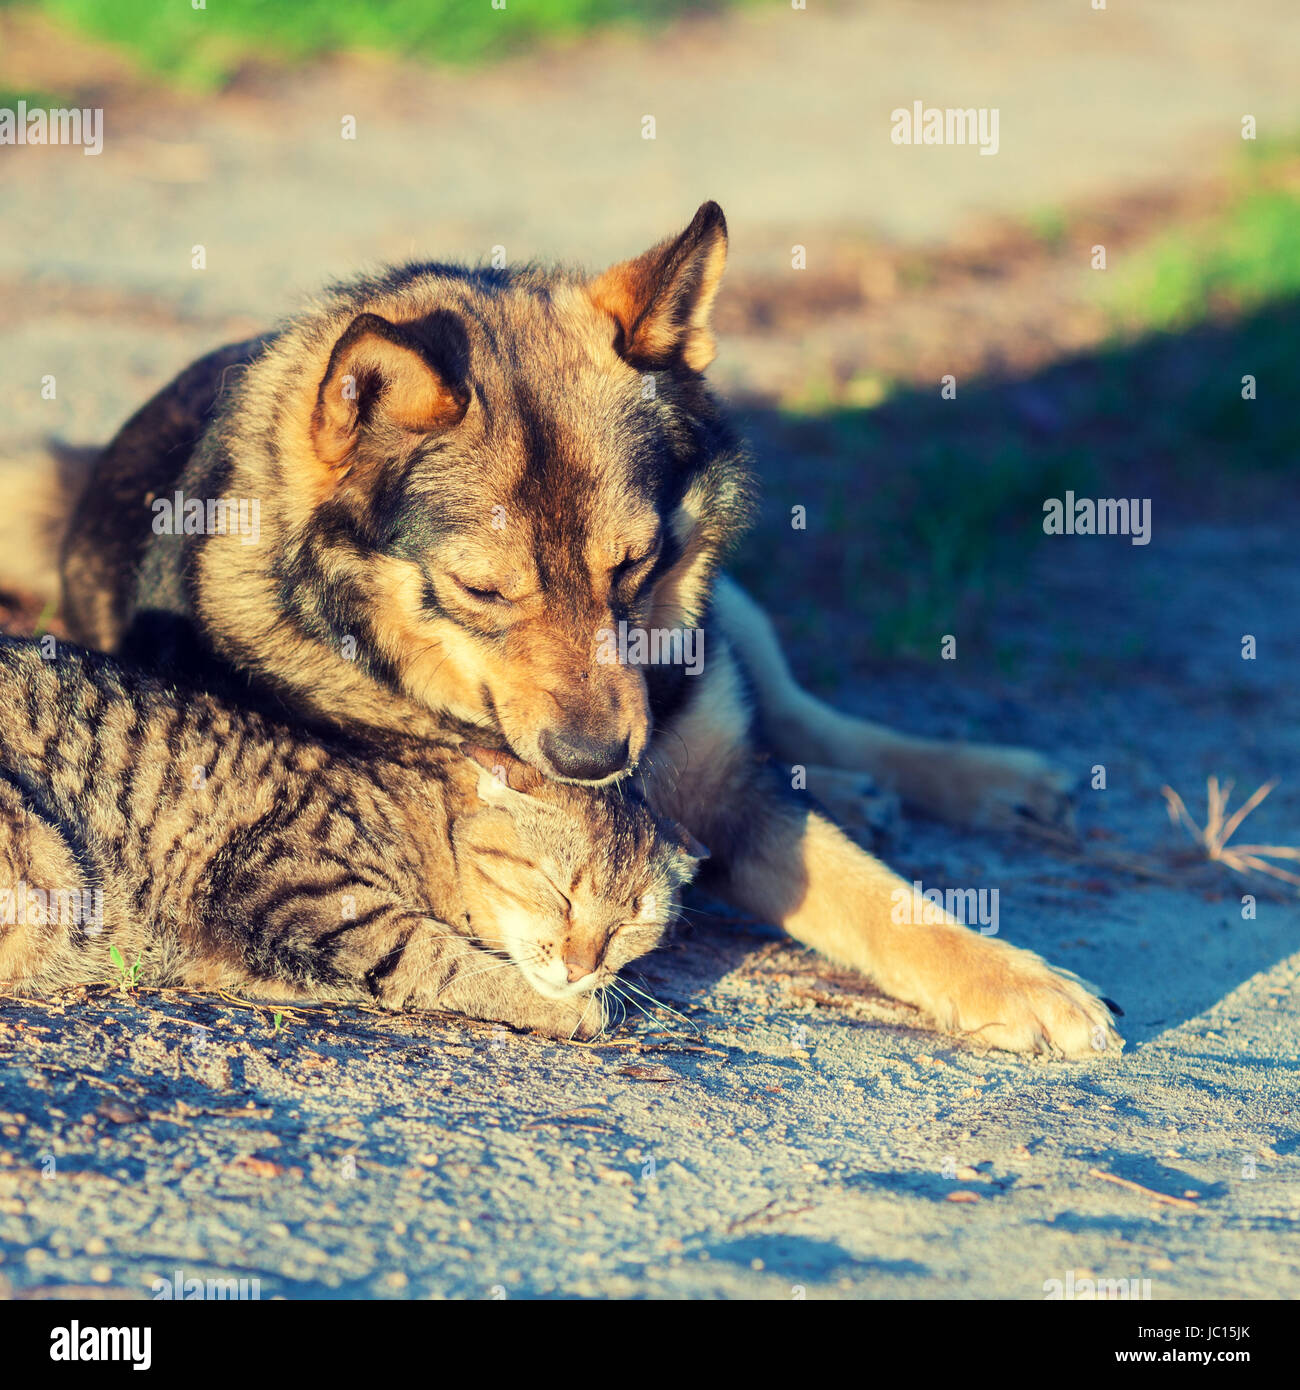 Dog and cat best friends playing together outdoor. Cat and dog lie together in the courtyard Stock Photo